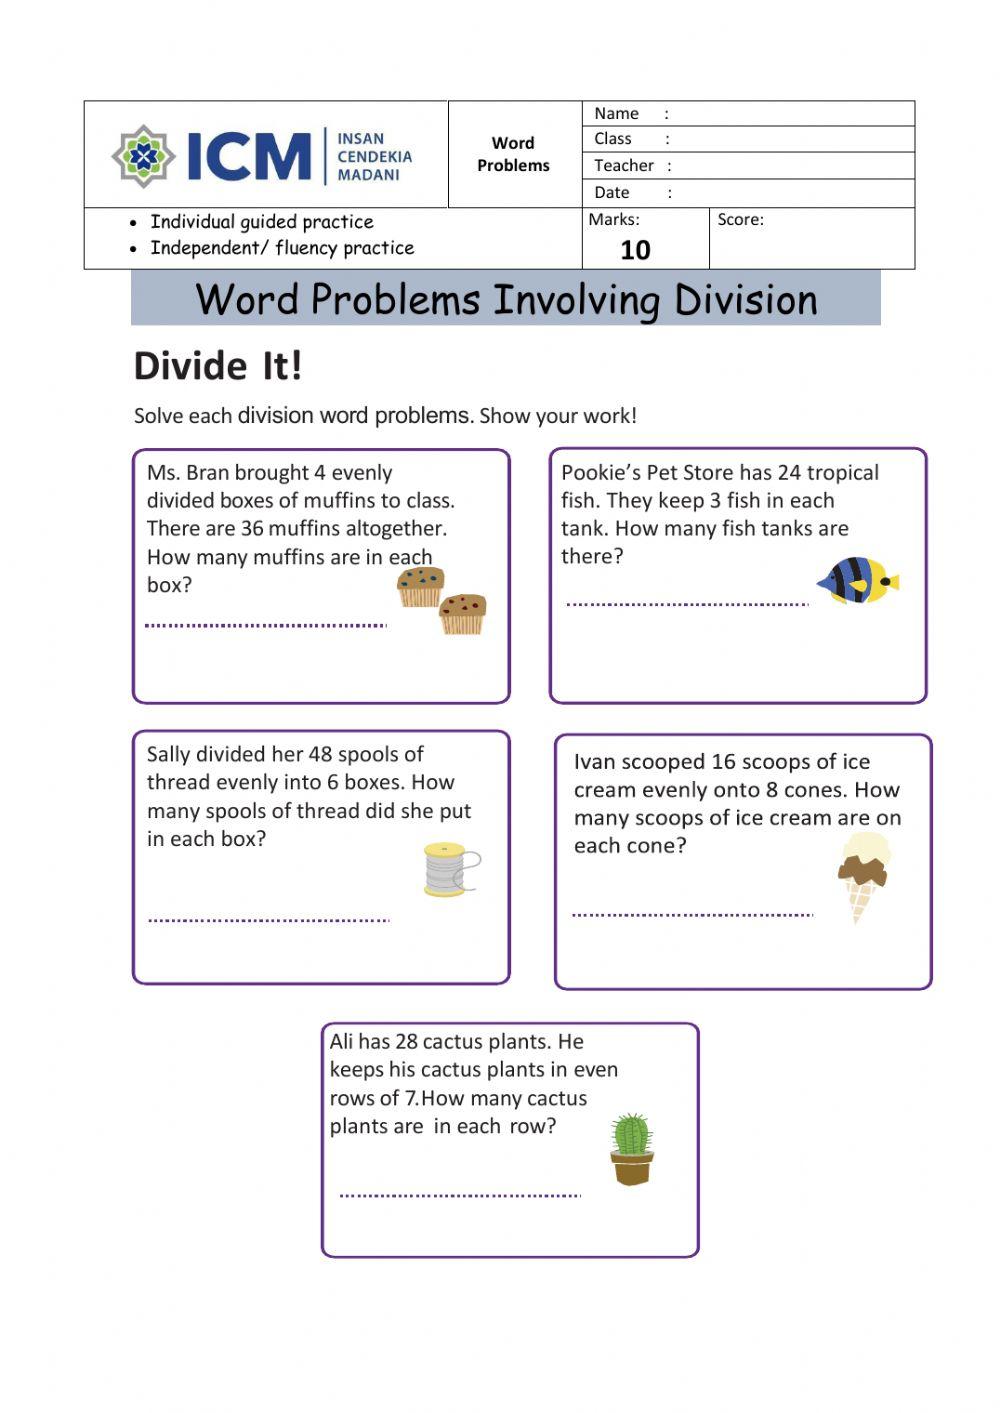 Solving word problems involving division